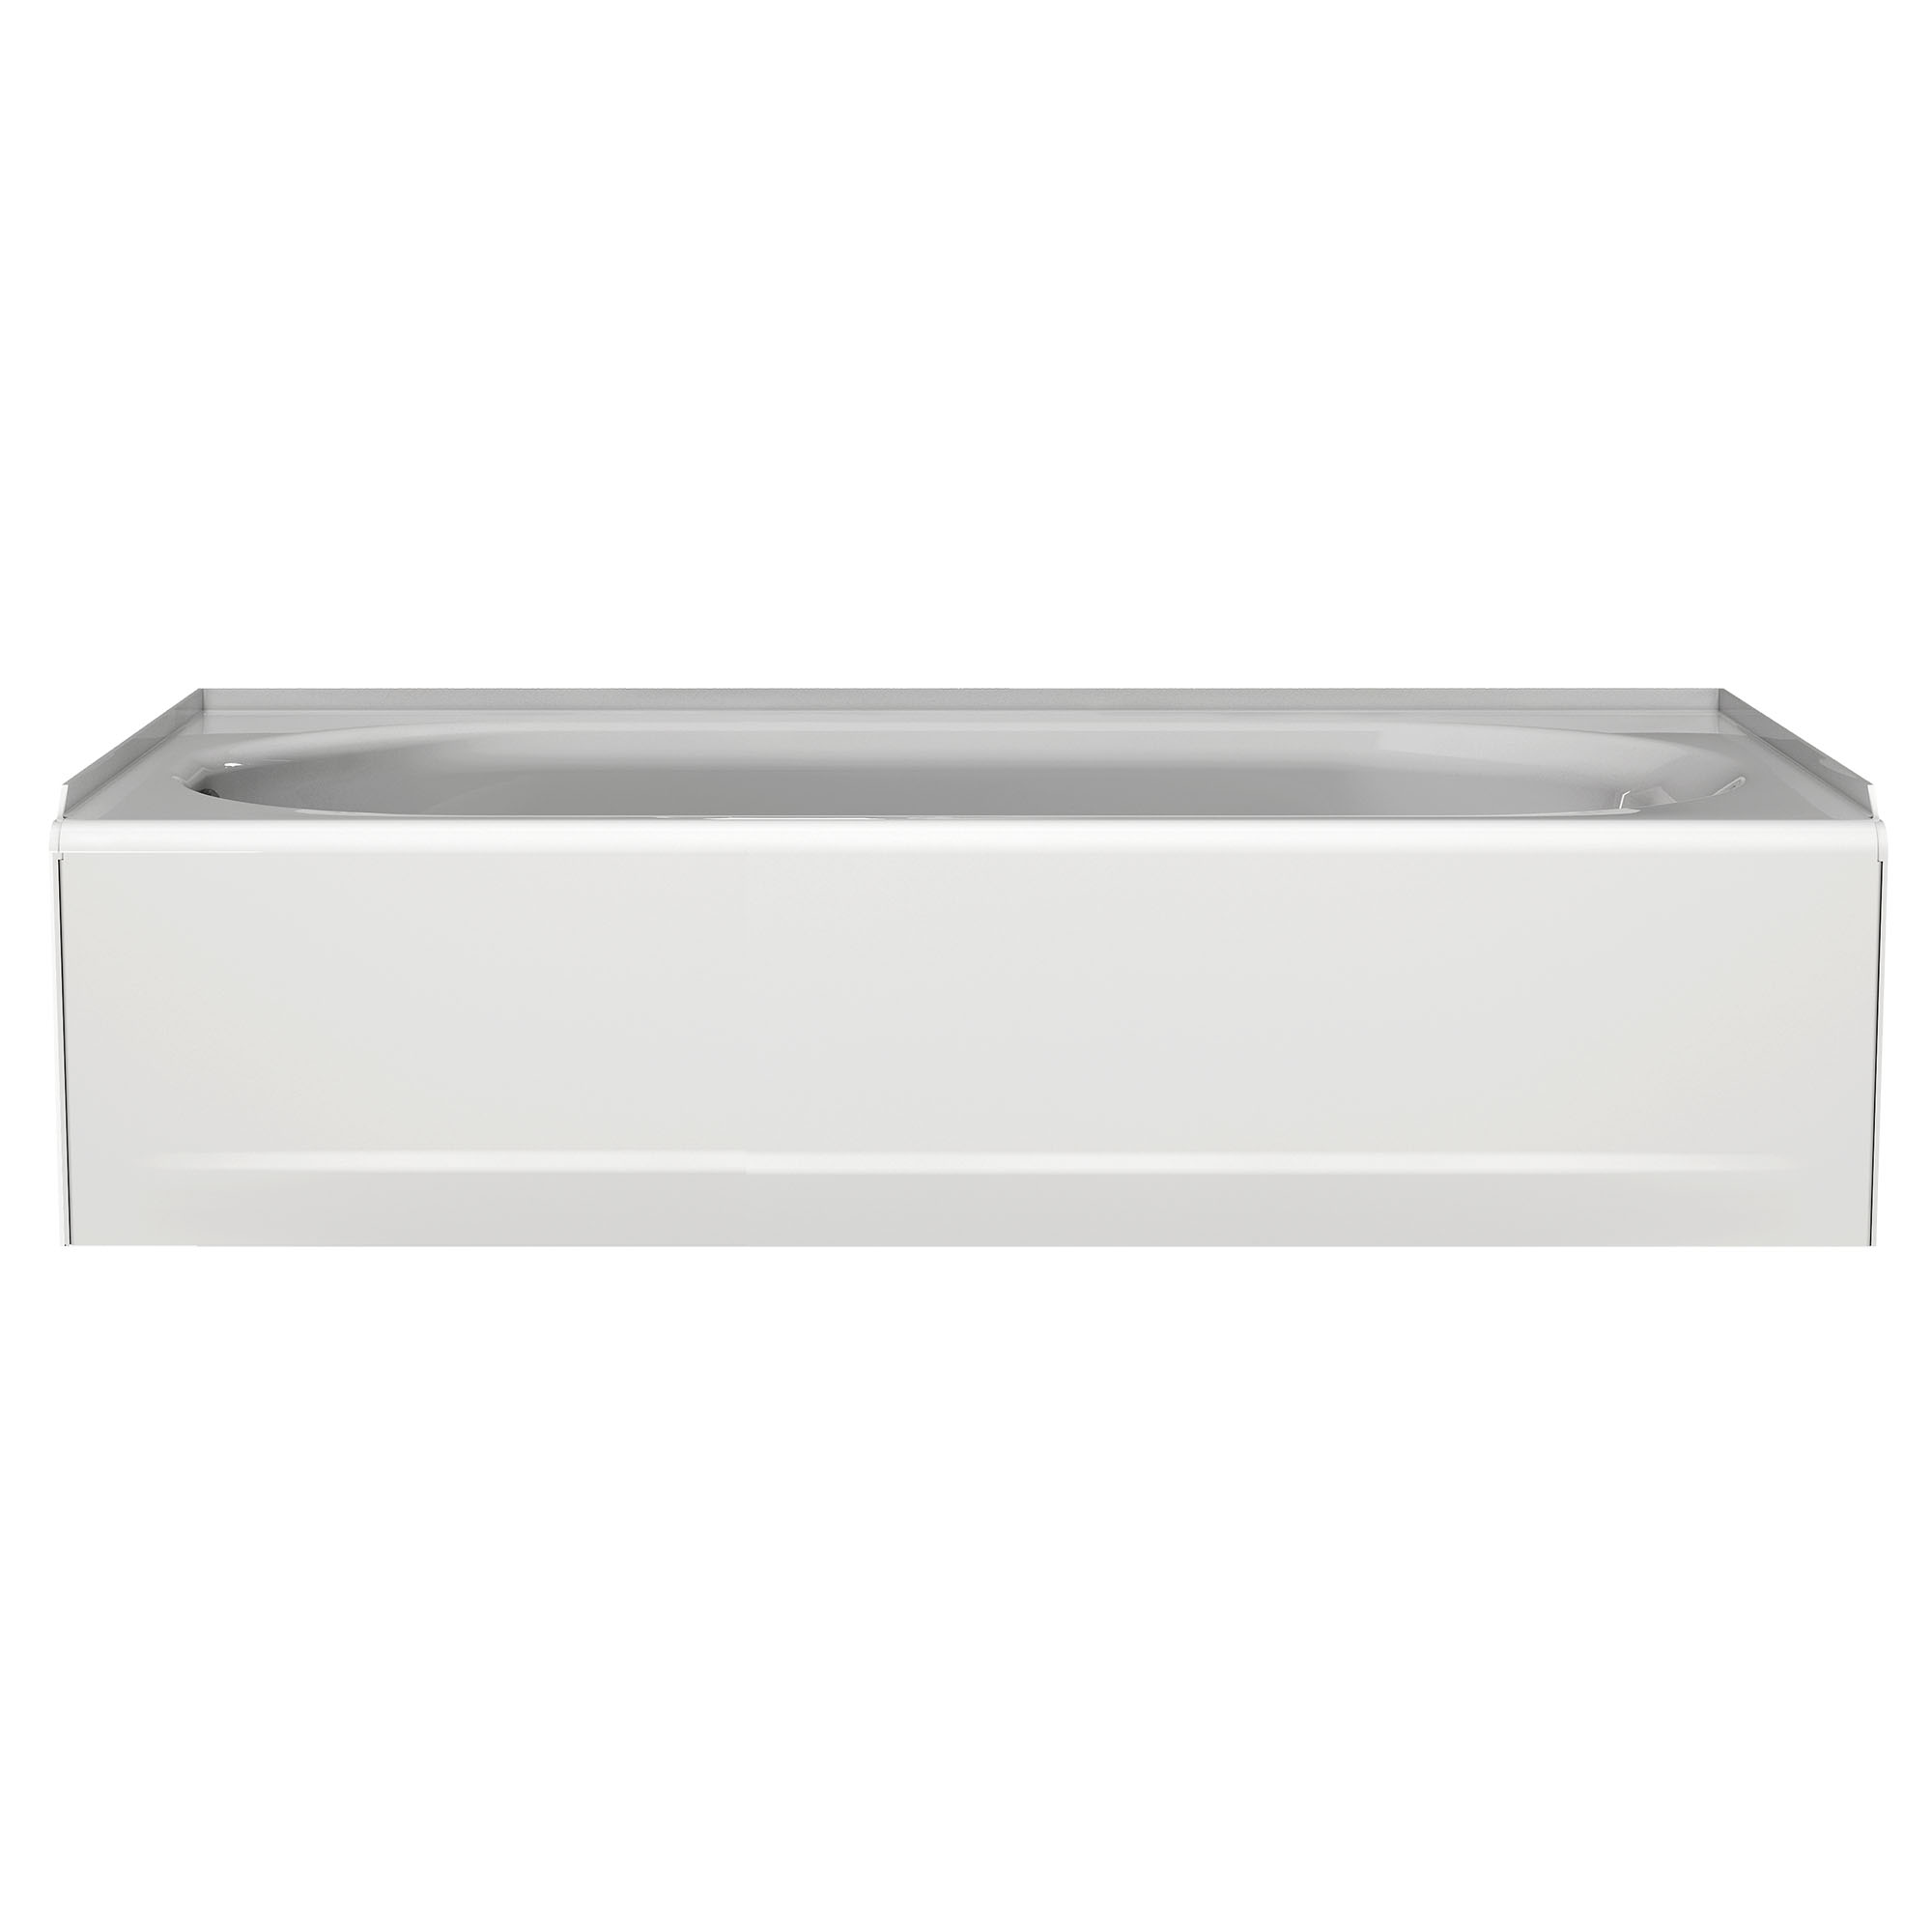 Princeton™ Americast™ 60 x 30-Inch Integral Apron Bathtub Left-Hand Outlet With Integral Drain